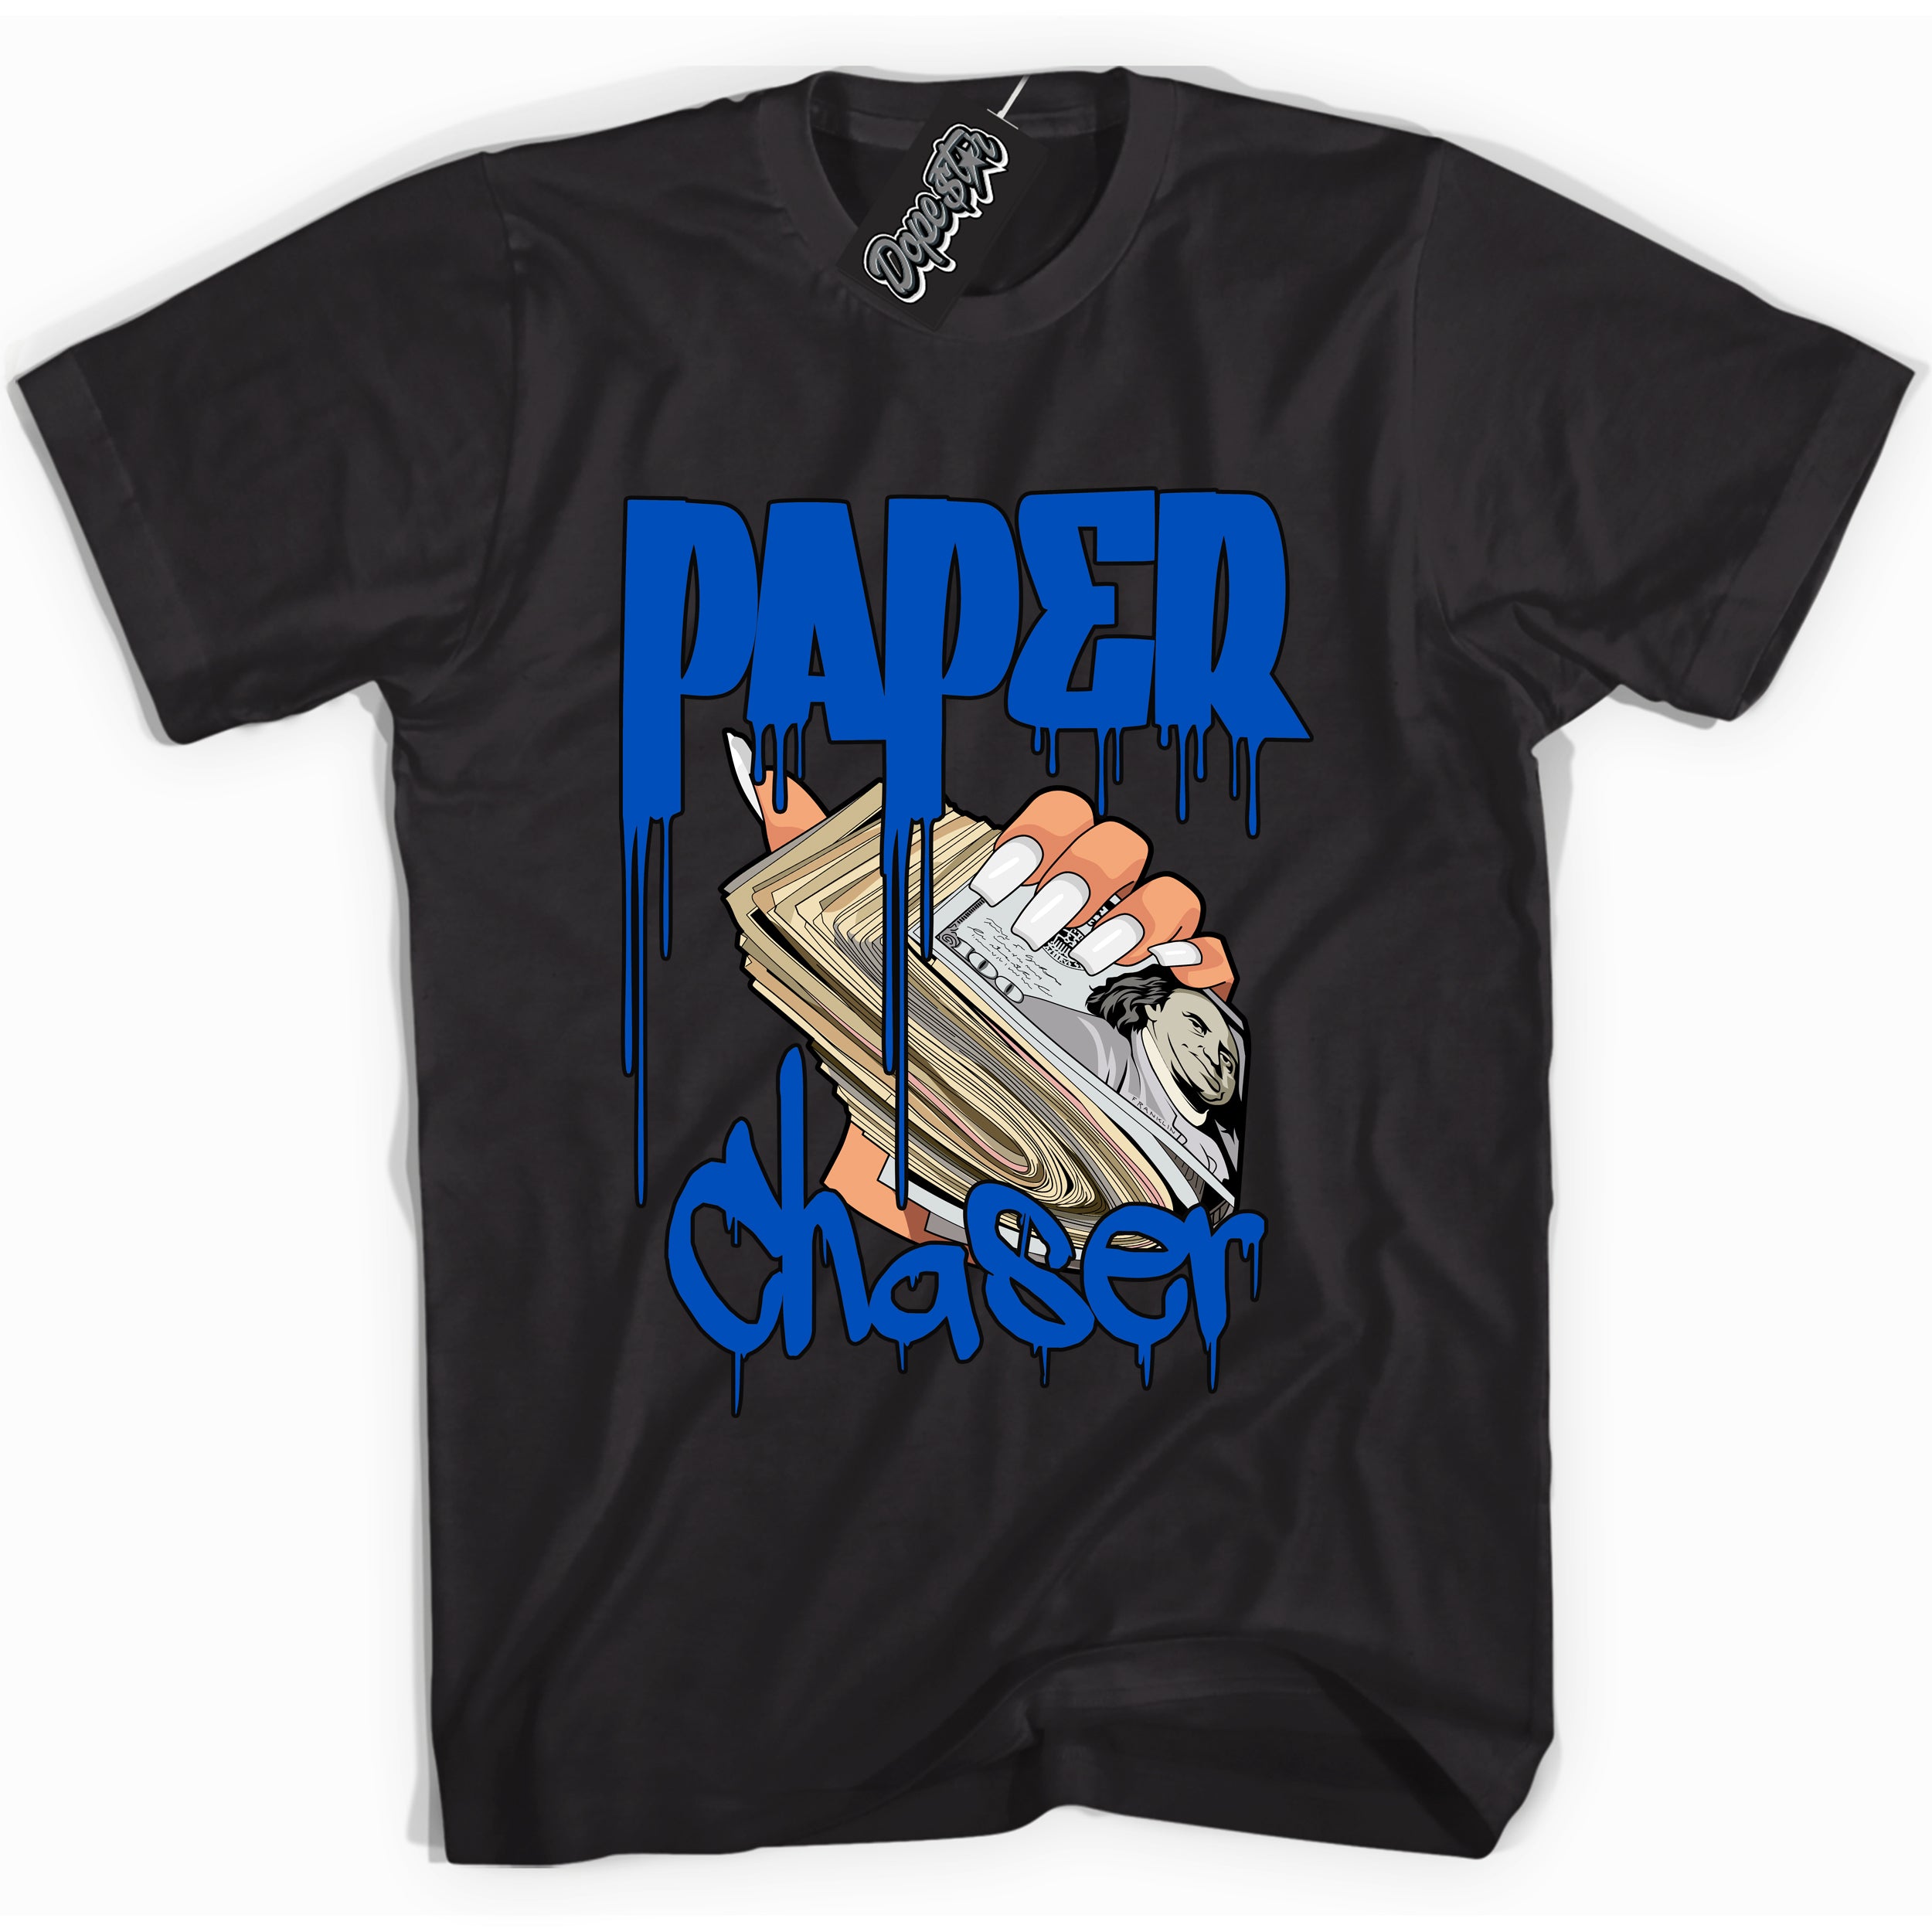 Cool Black graphic tee with "Paper Chaser" design, that perfectly matches Royal Reimagined 1s sneakers 